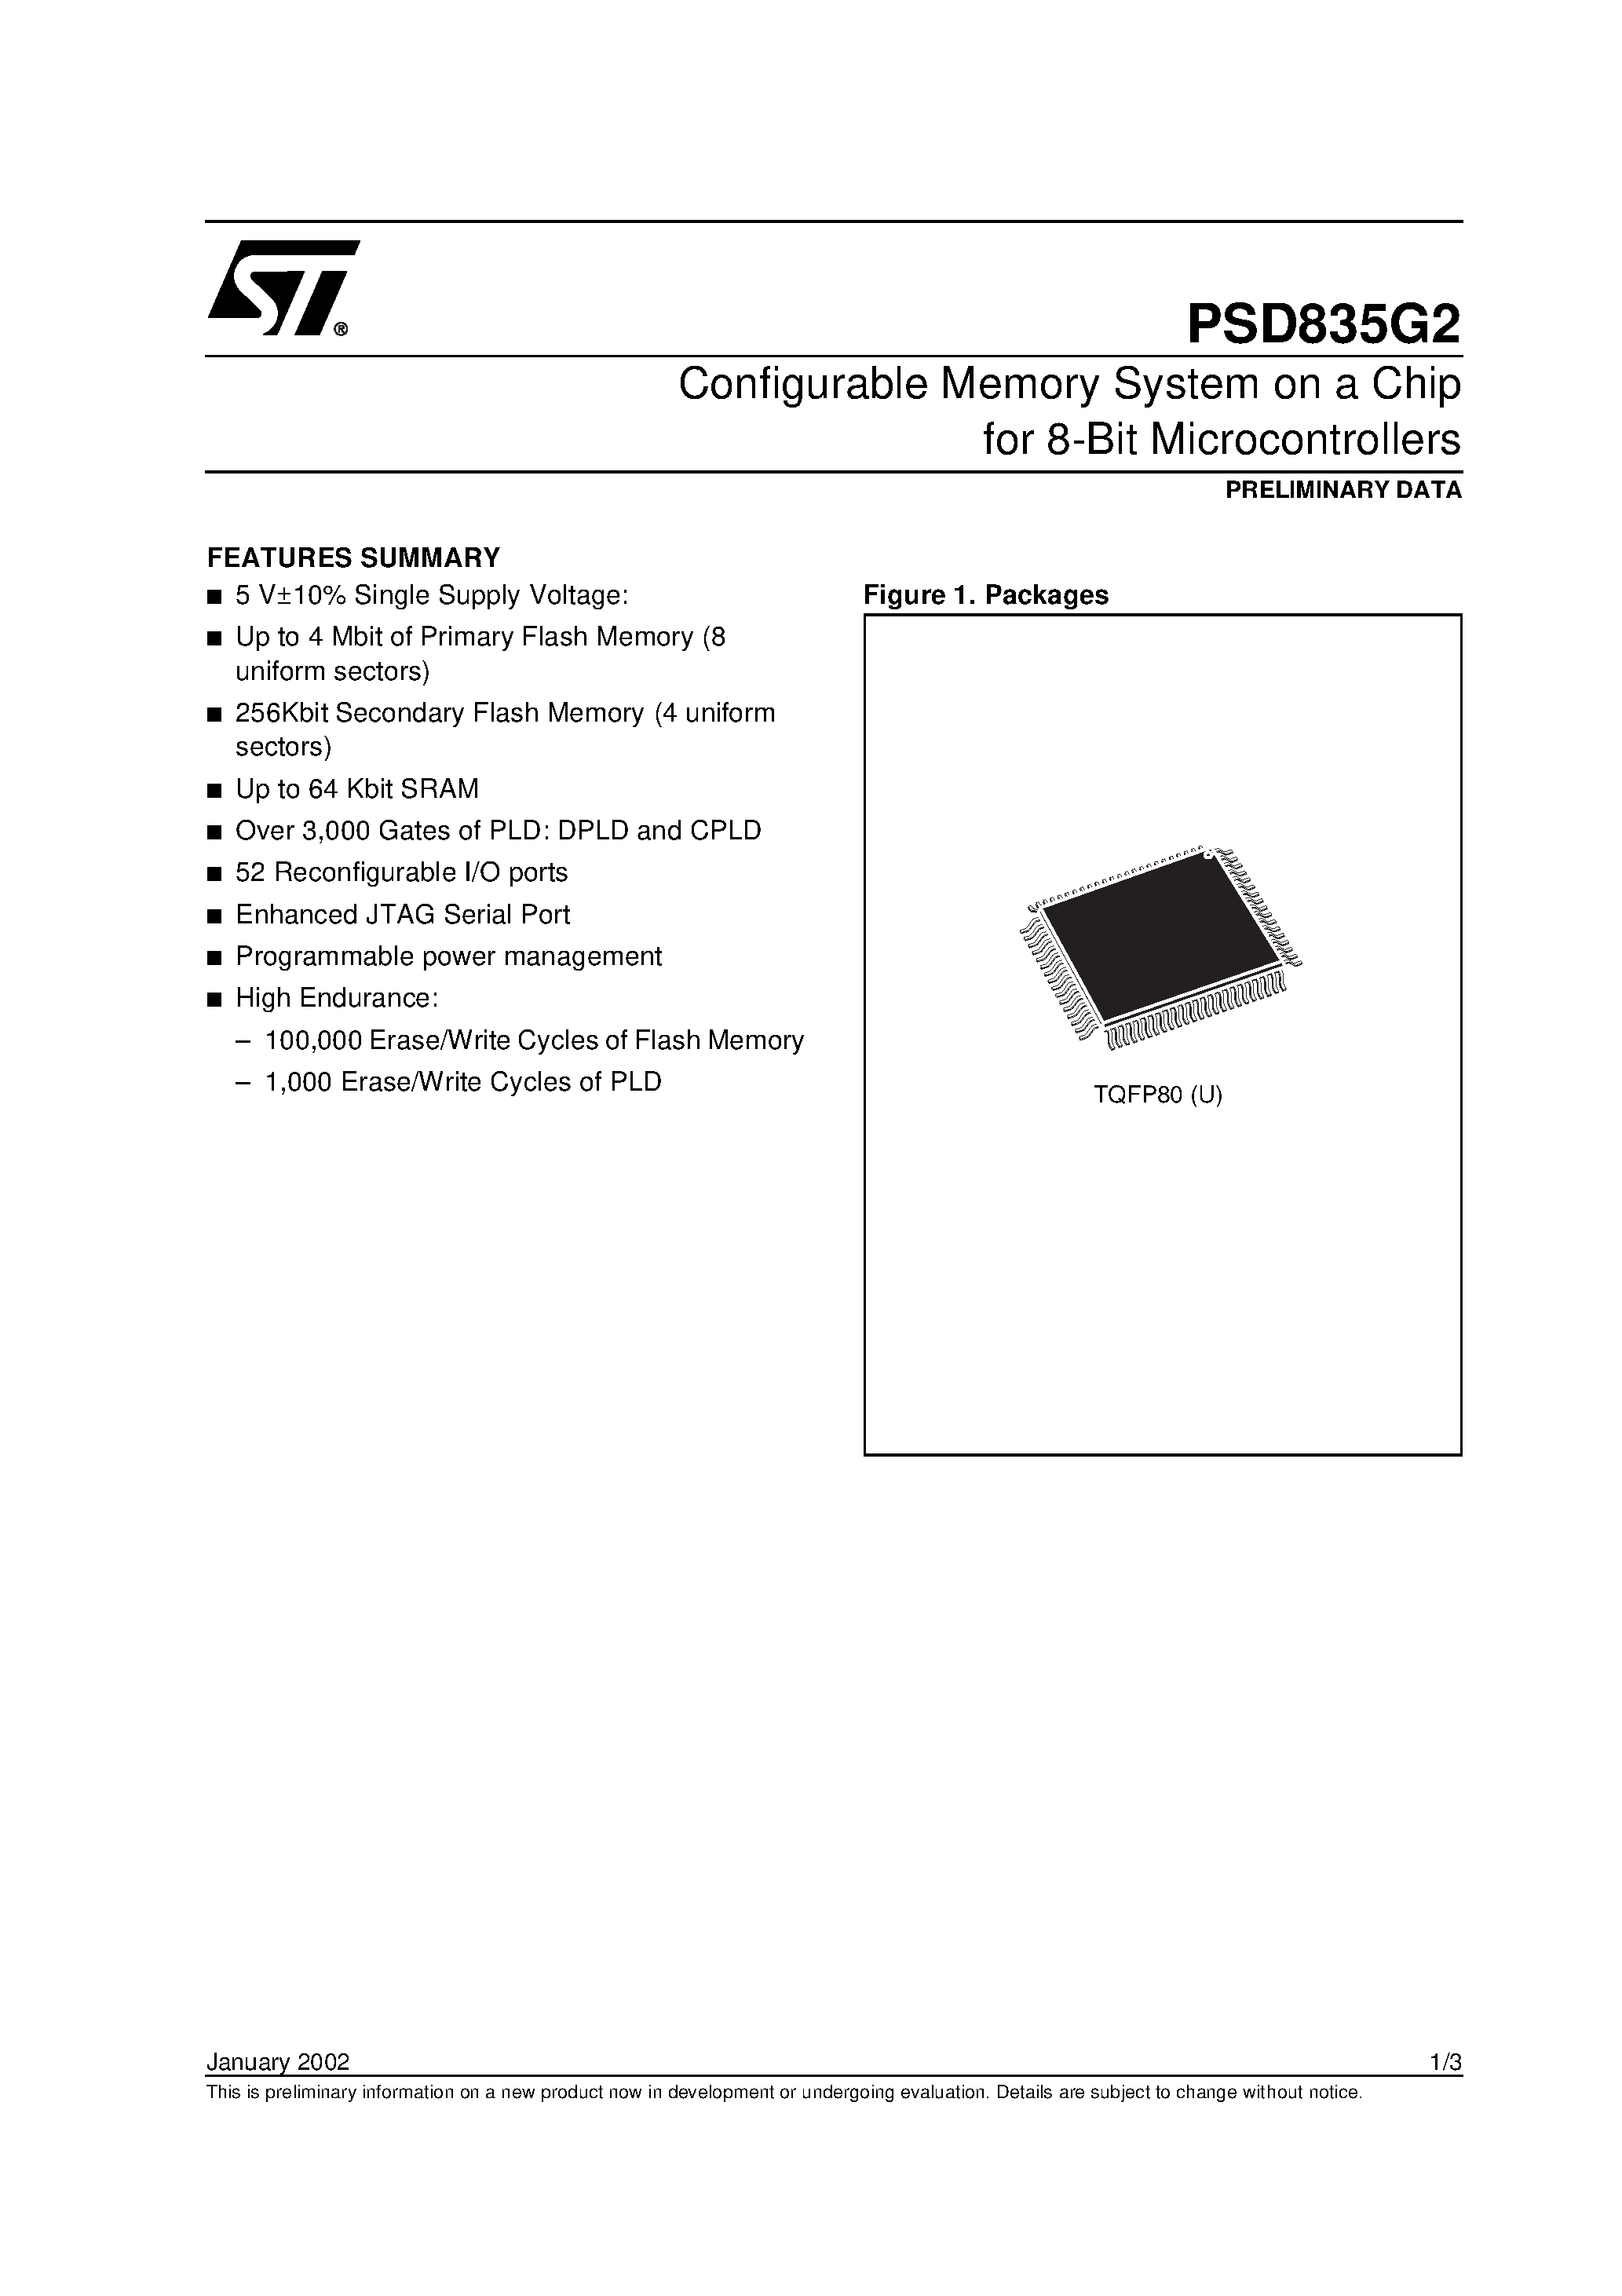 Datasheet PSD835F1-A-20J - Configurable Memory System on a Chip for 8-Bit Microcontrollers page 1